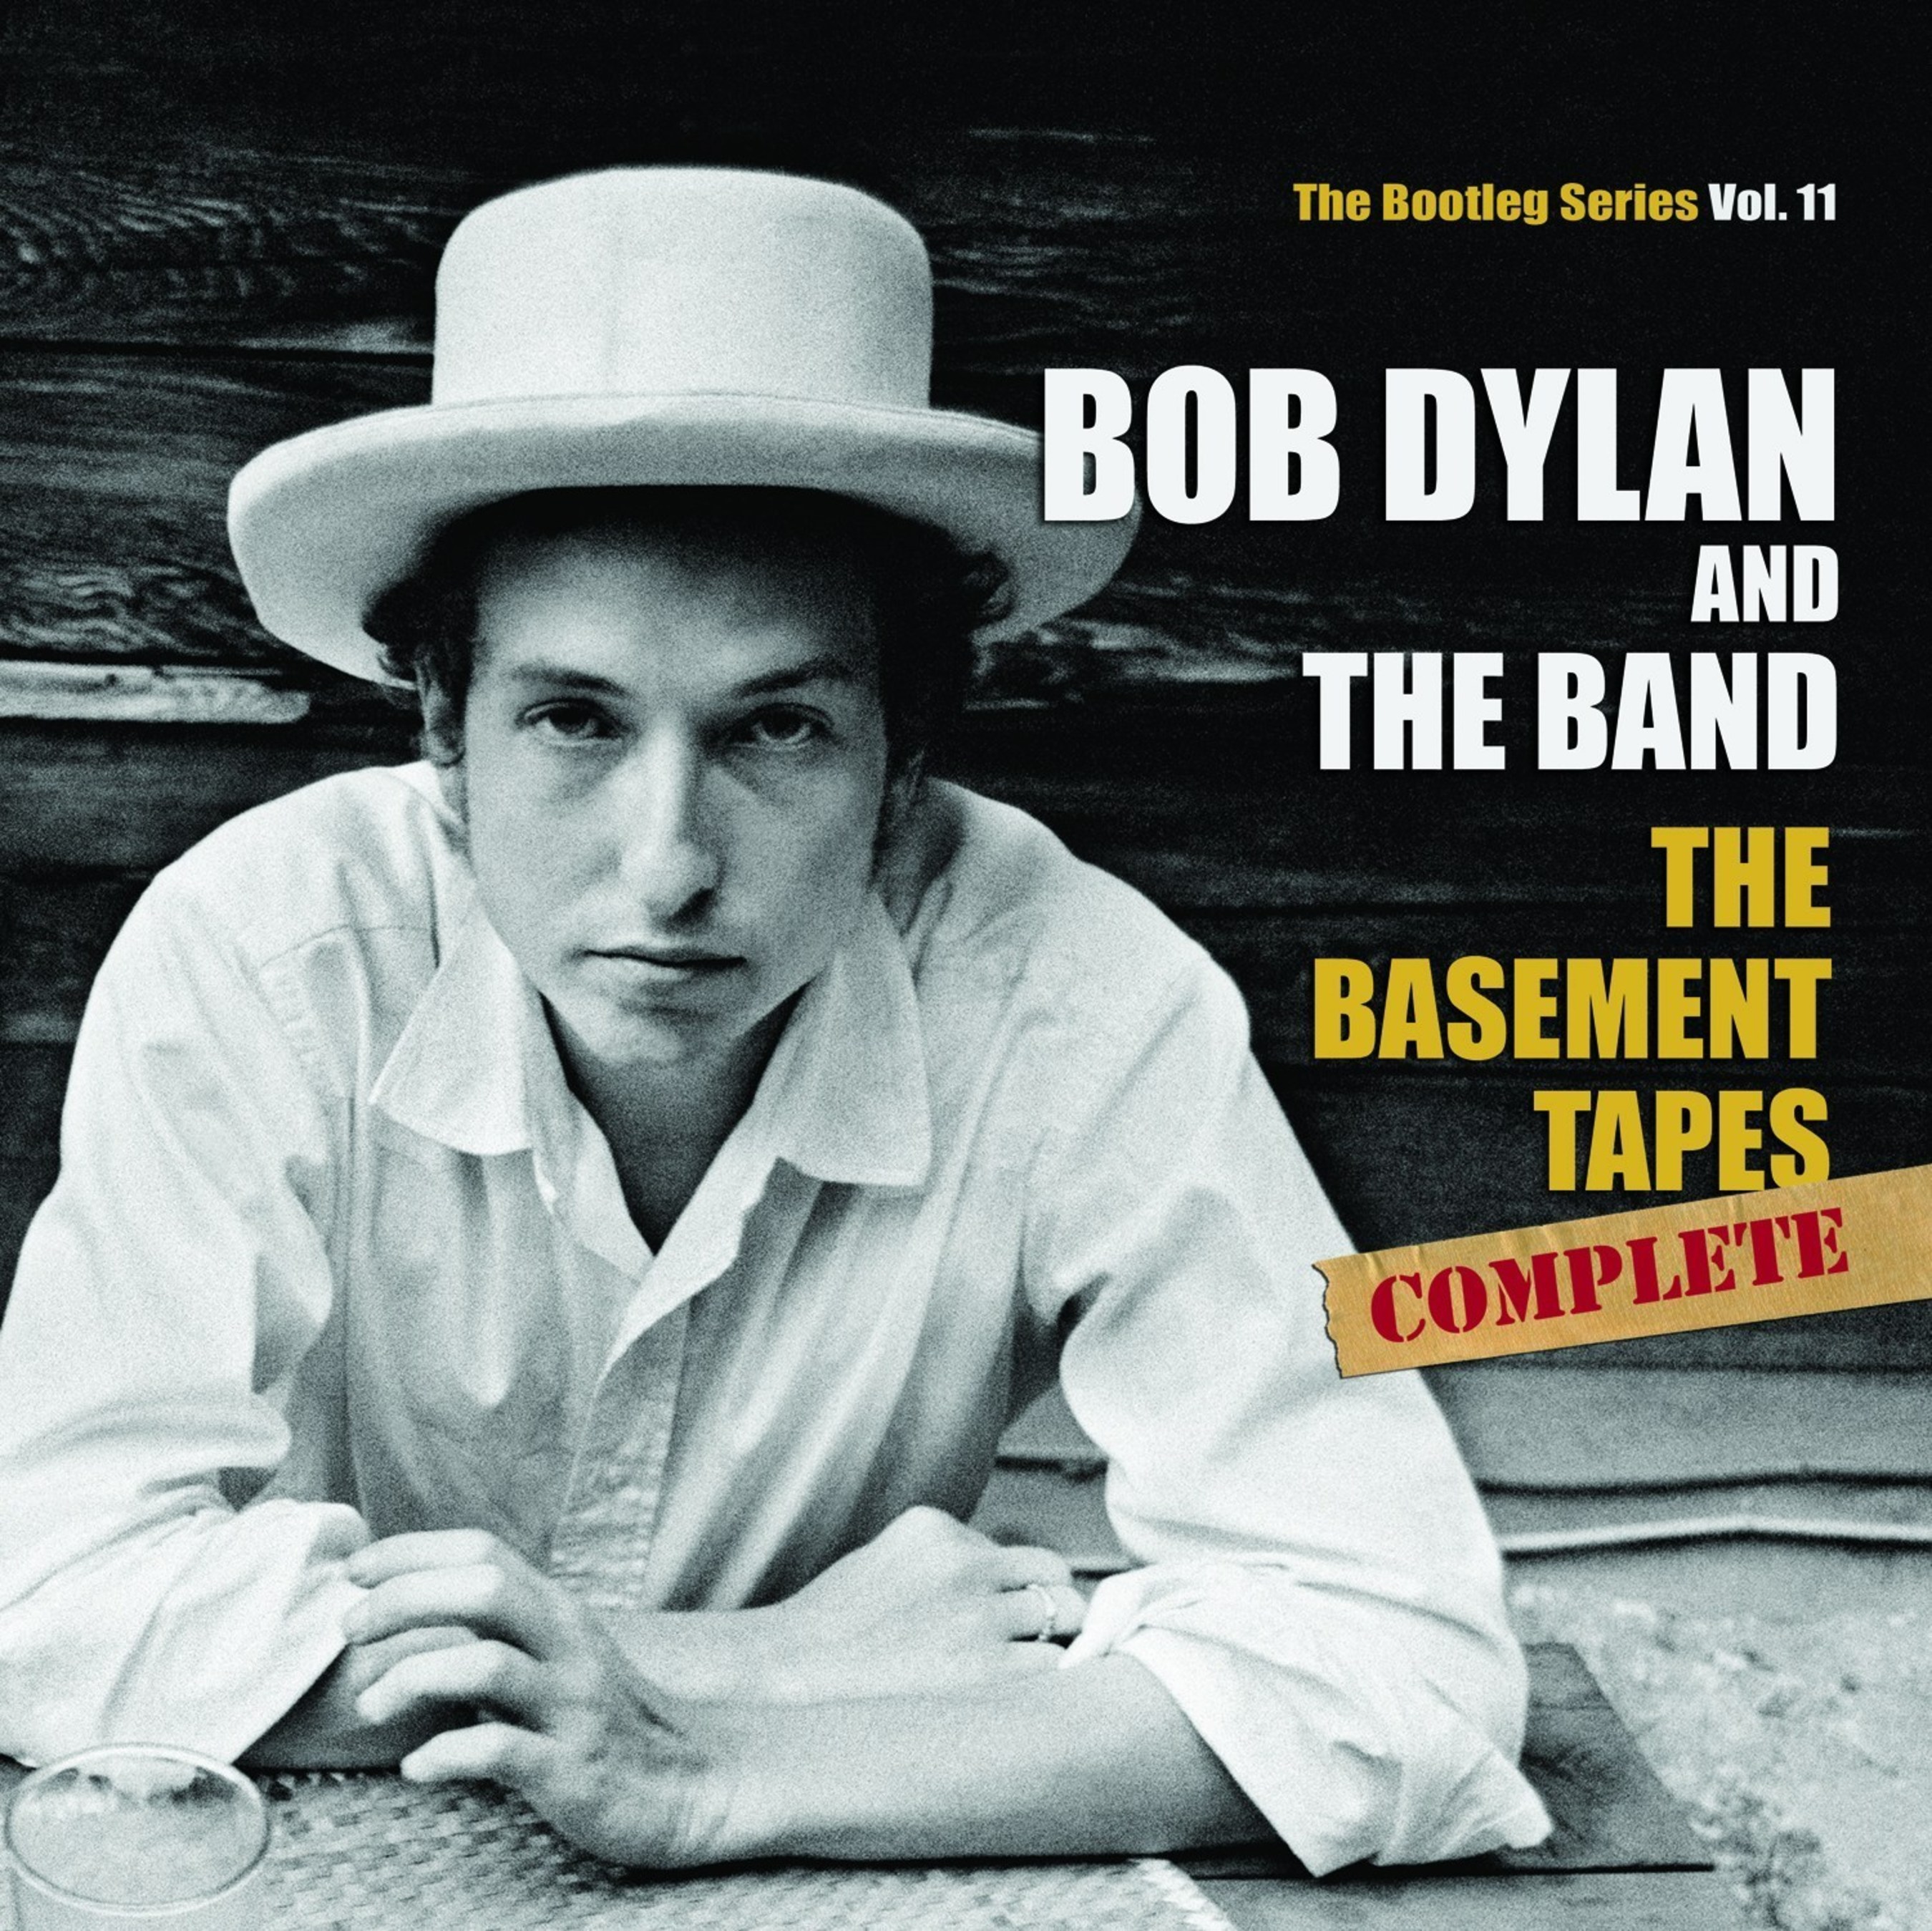 Columbia Records/Legacy Recordings will release Bob Dylan's "The Basement Tapes Complete: The Bootleg Series Vol. 11" on November 4 (PRNewsFoto/Legacy Recordings)